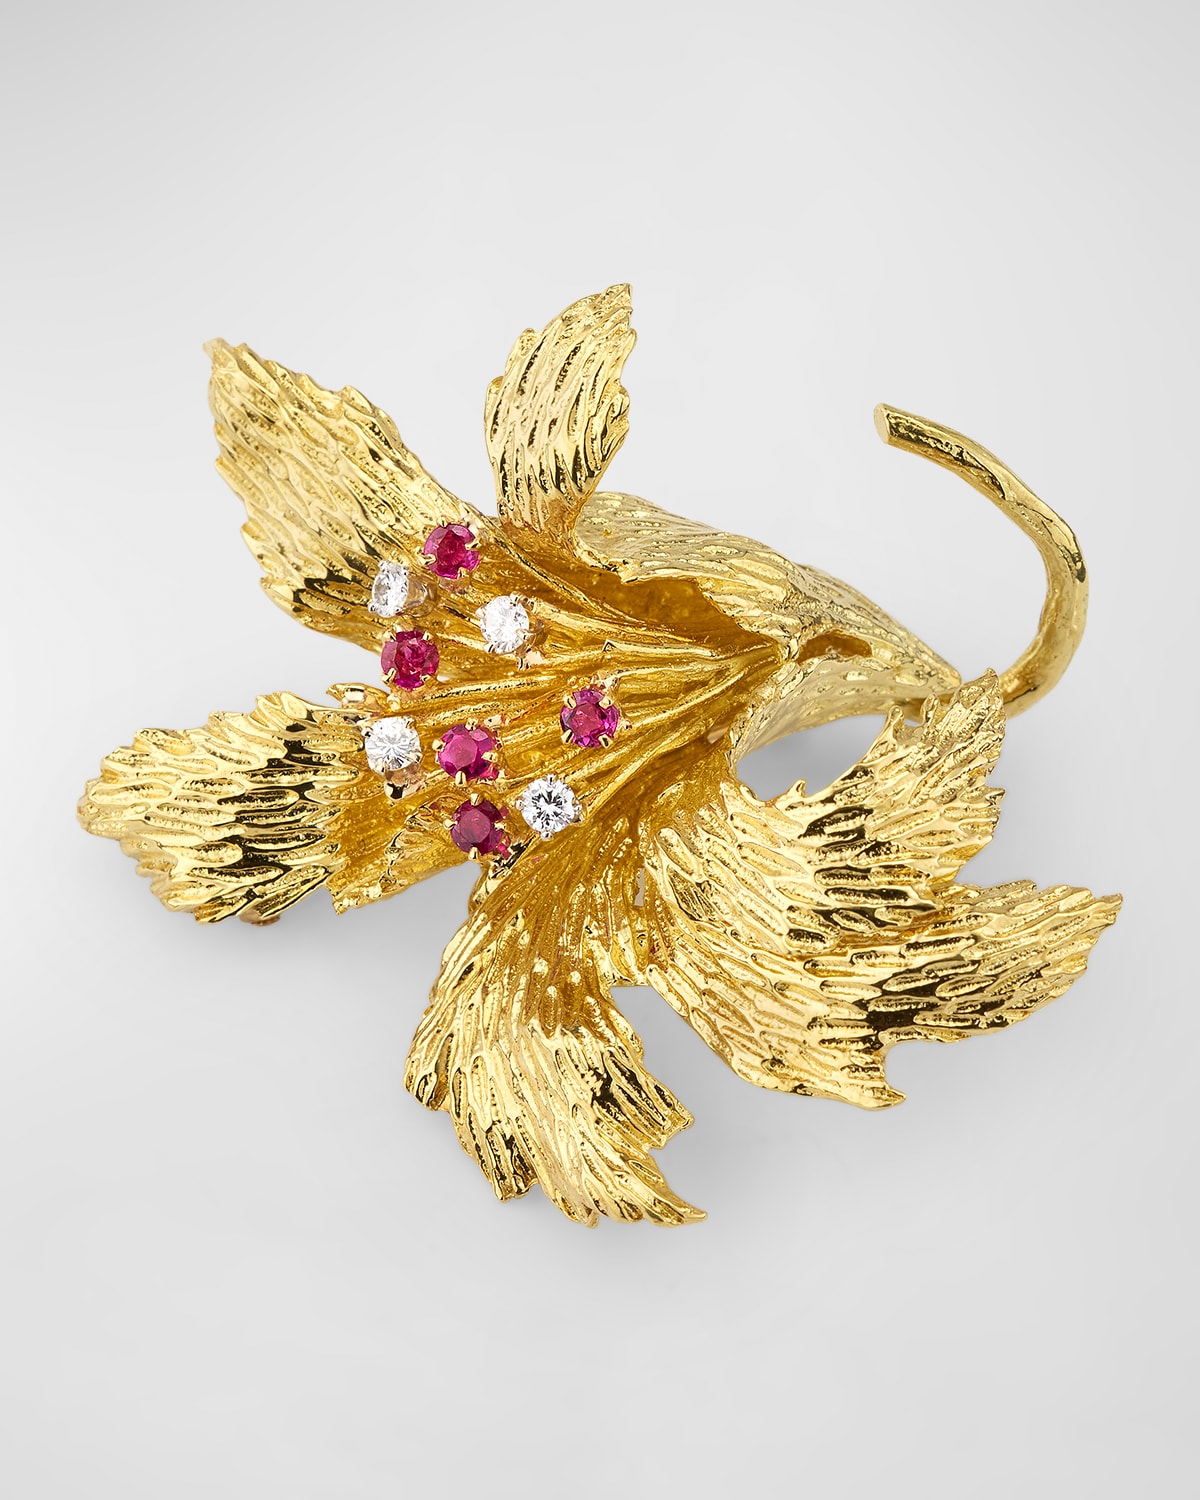 Estate Cartier 18K Yellow Gold and White Gold Flower Brooch with Rubies and Diamonds